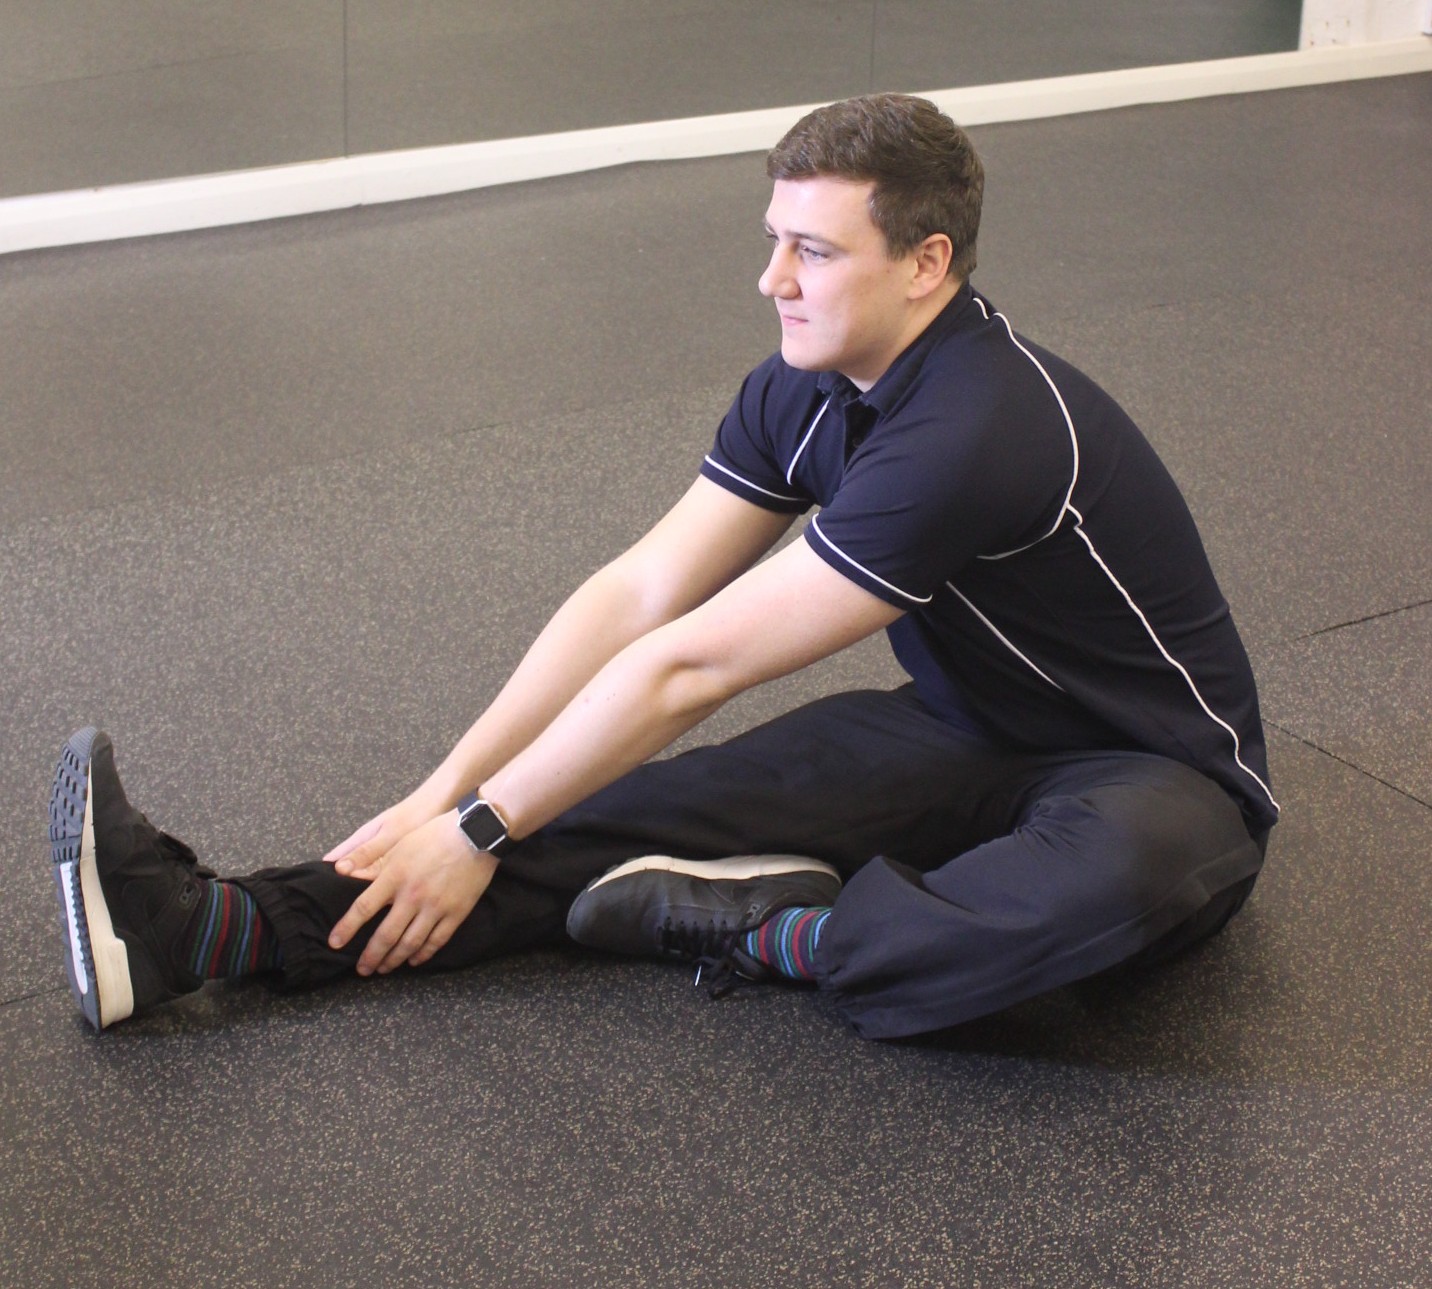 Stretching for athletes